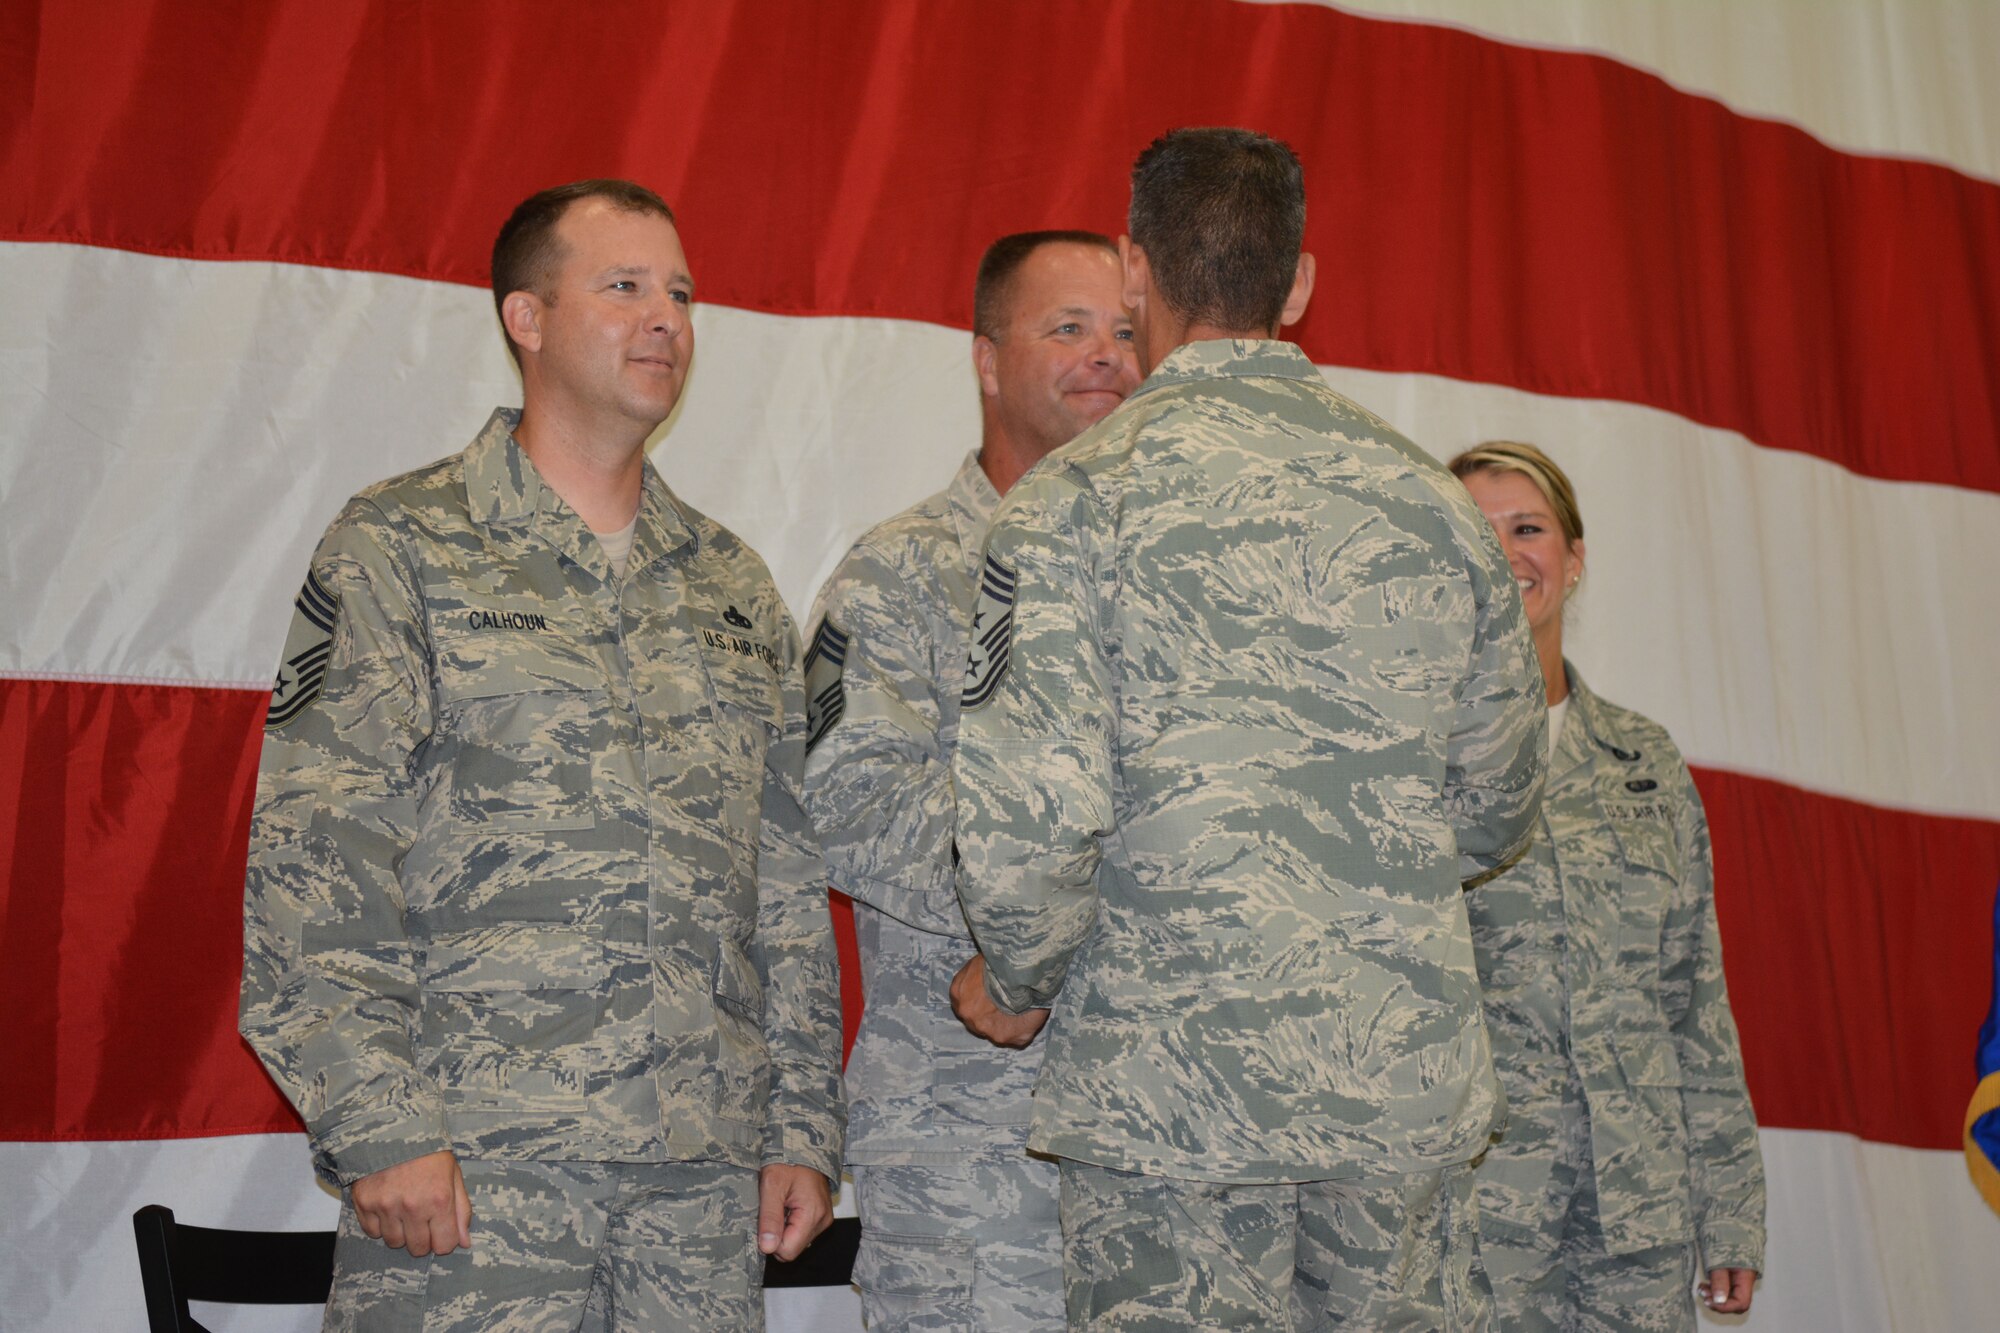 Chief Master Sgt. Thomas Safer, 115th Fighter Wing command chief, presents a state chief coin to each of the new 115 FW chiefs during their promotion recognition ceremony at Hangar 406 in Madison, Wis., Aug. 23, 2014. Only 2 percent of the Airmen in the Air National Guard can obtain the rank of chief master sergeant. (Air National Guard photo by Senior Airman Andrea F. Liechti)